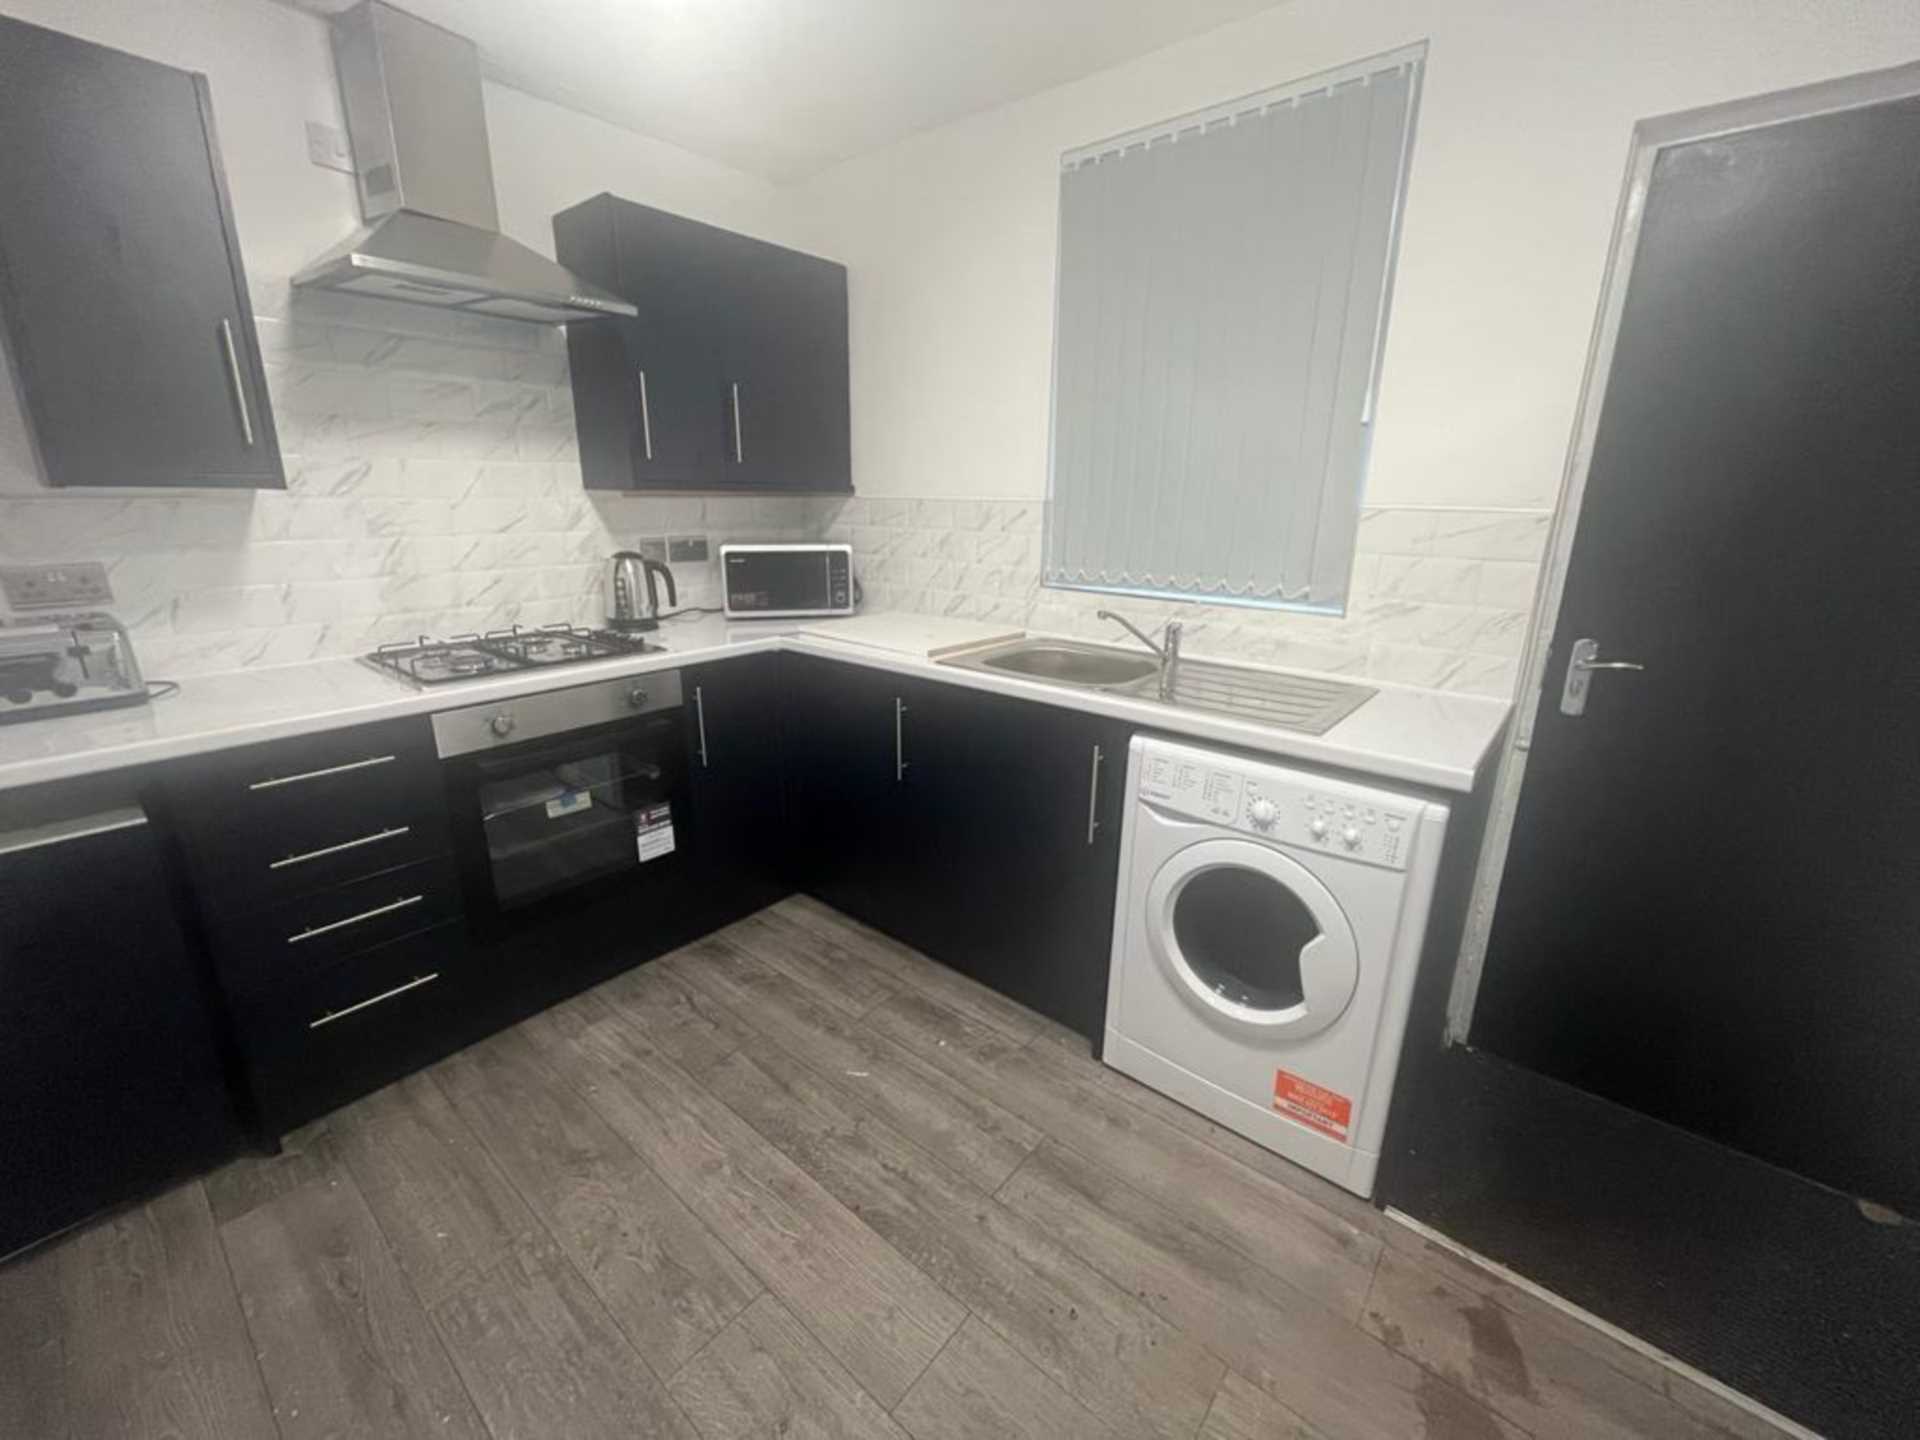 2 bed Room for rent in Liverpool. From Student Haus